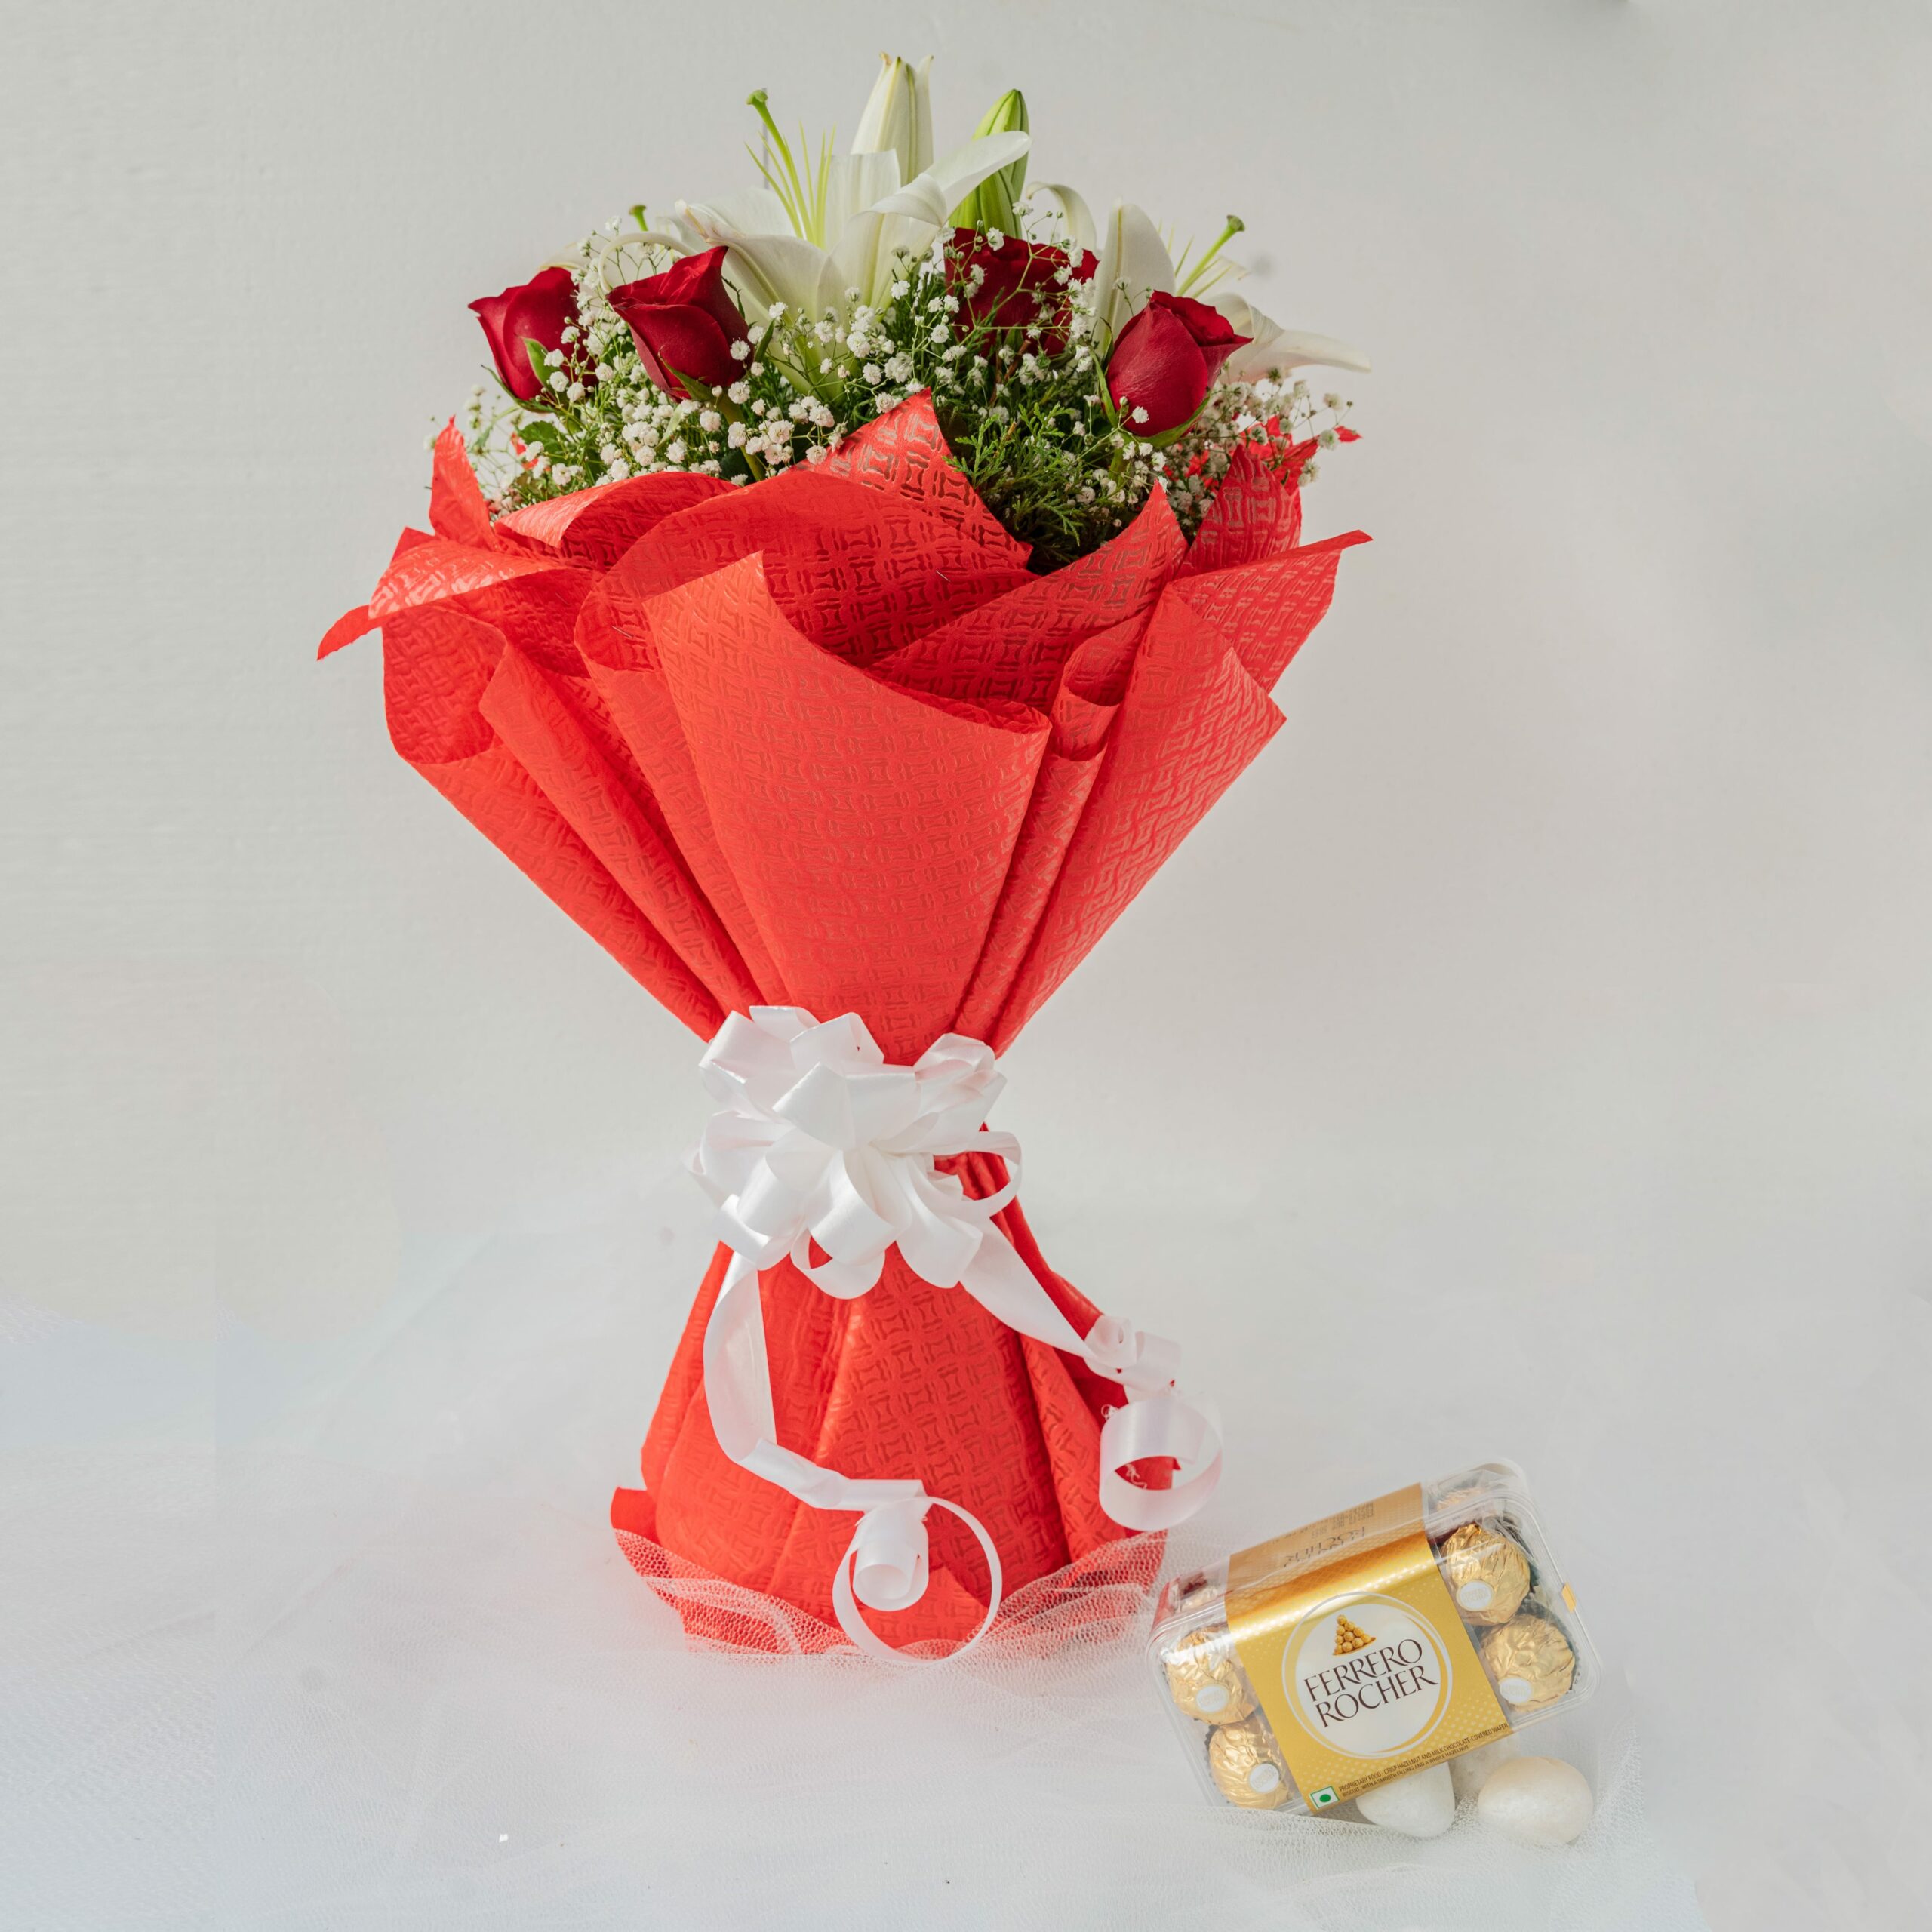 FluteRey FERRERO ROCHER CHOCOLATE BOUQUET WITH BIRTHDAY THOUGHT CARD Paper  Gift Box Price in India - Buy FluteRey FERRERO ROCHER CHOCOLATE BOUQUET  WITH BIRTHDAY THOUGHT CARD Paper Gift Box online at Flipkart.com